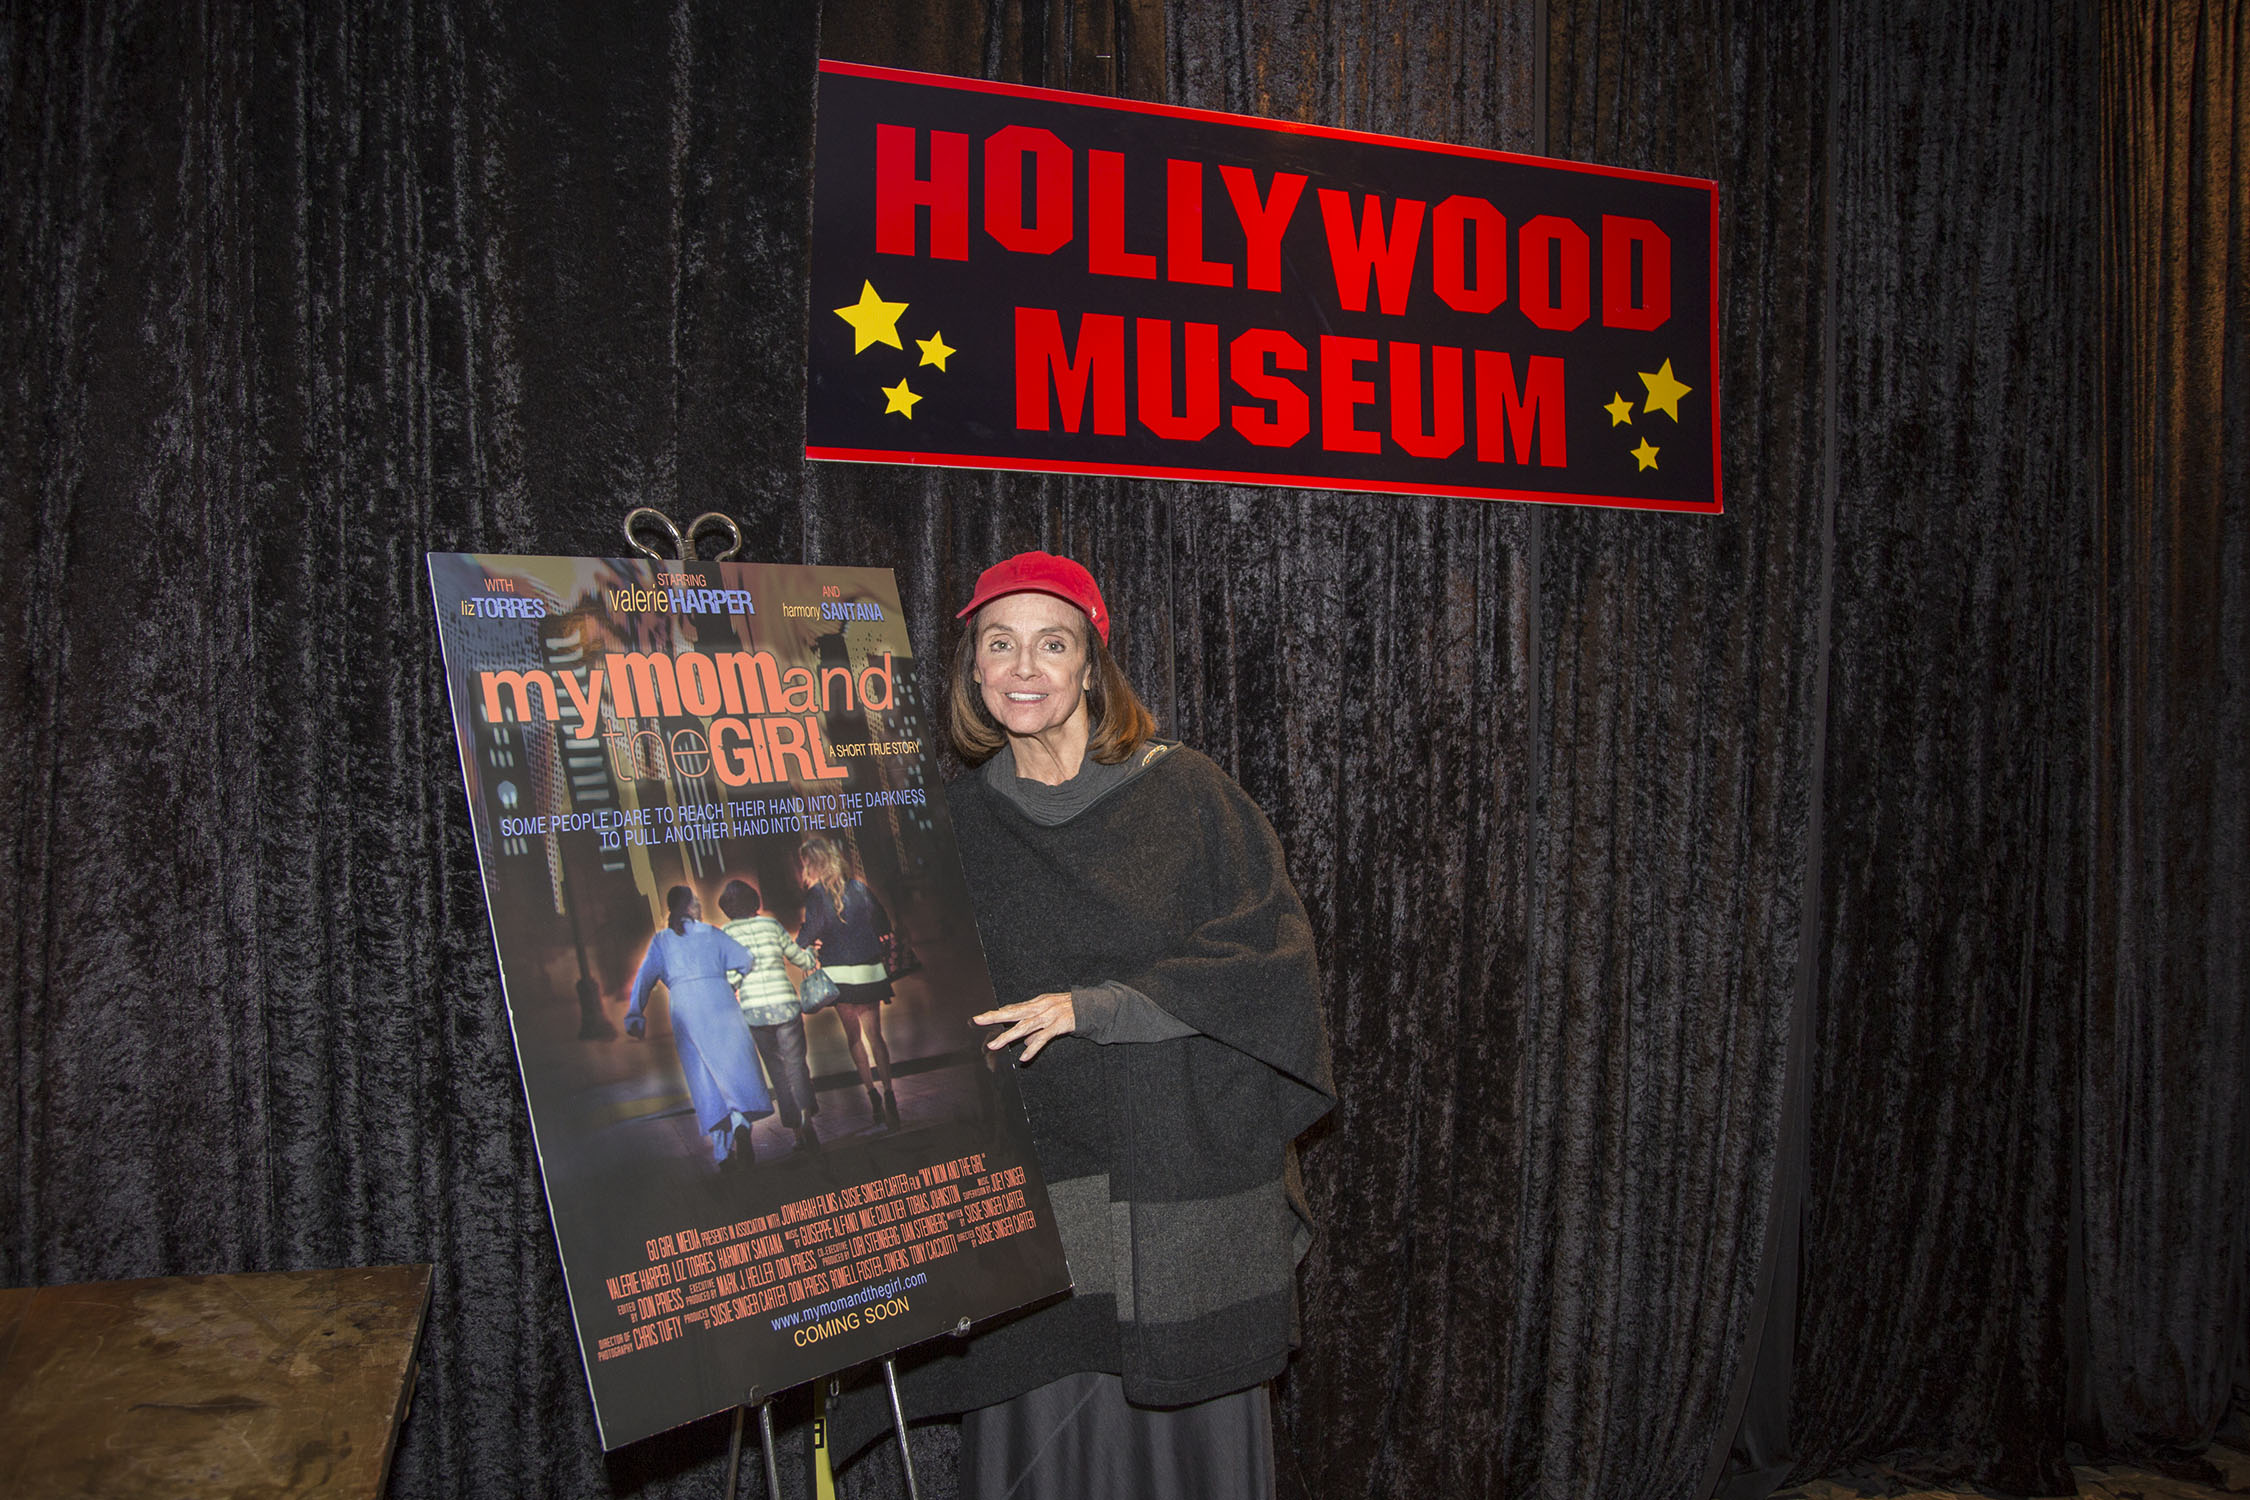 Valerie Harper with My Mother and the Girl poster